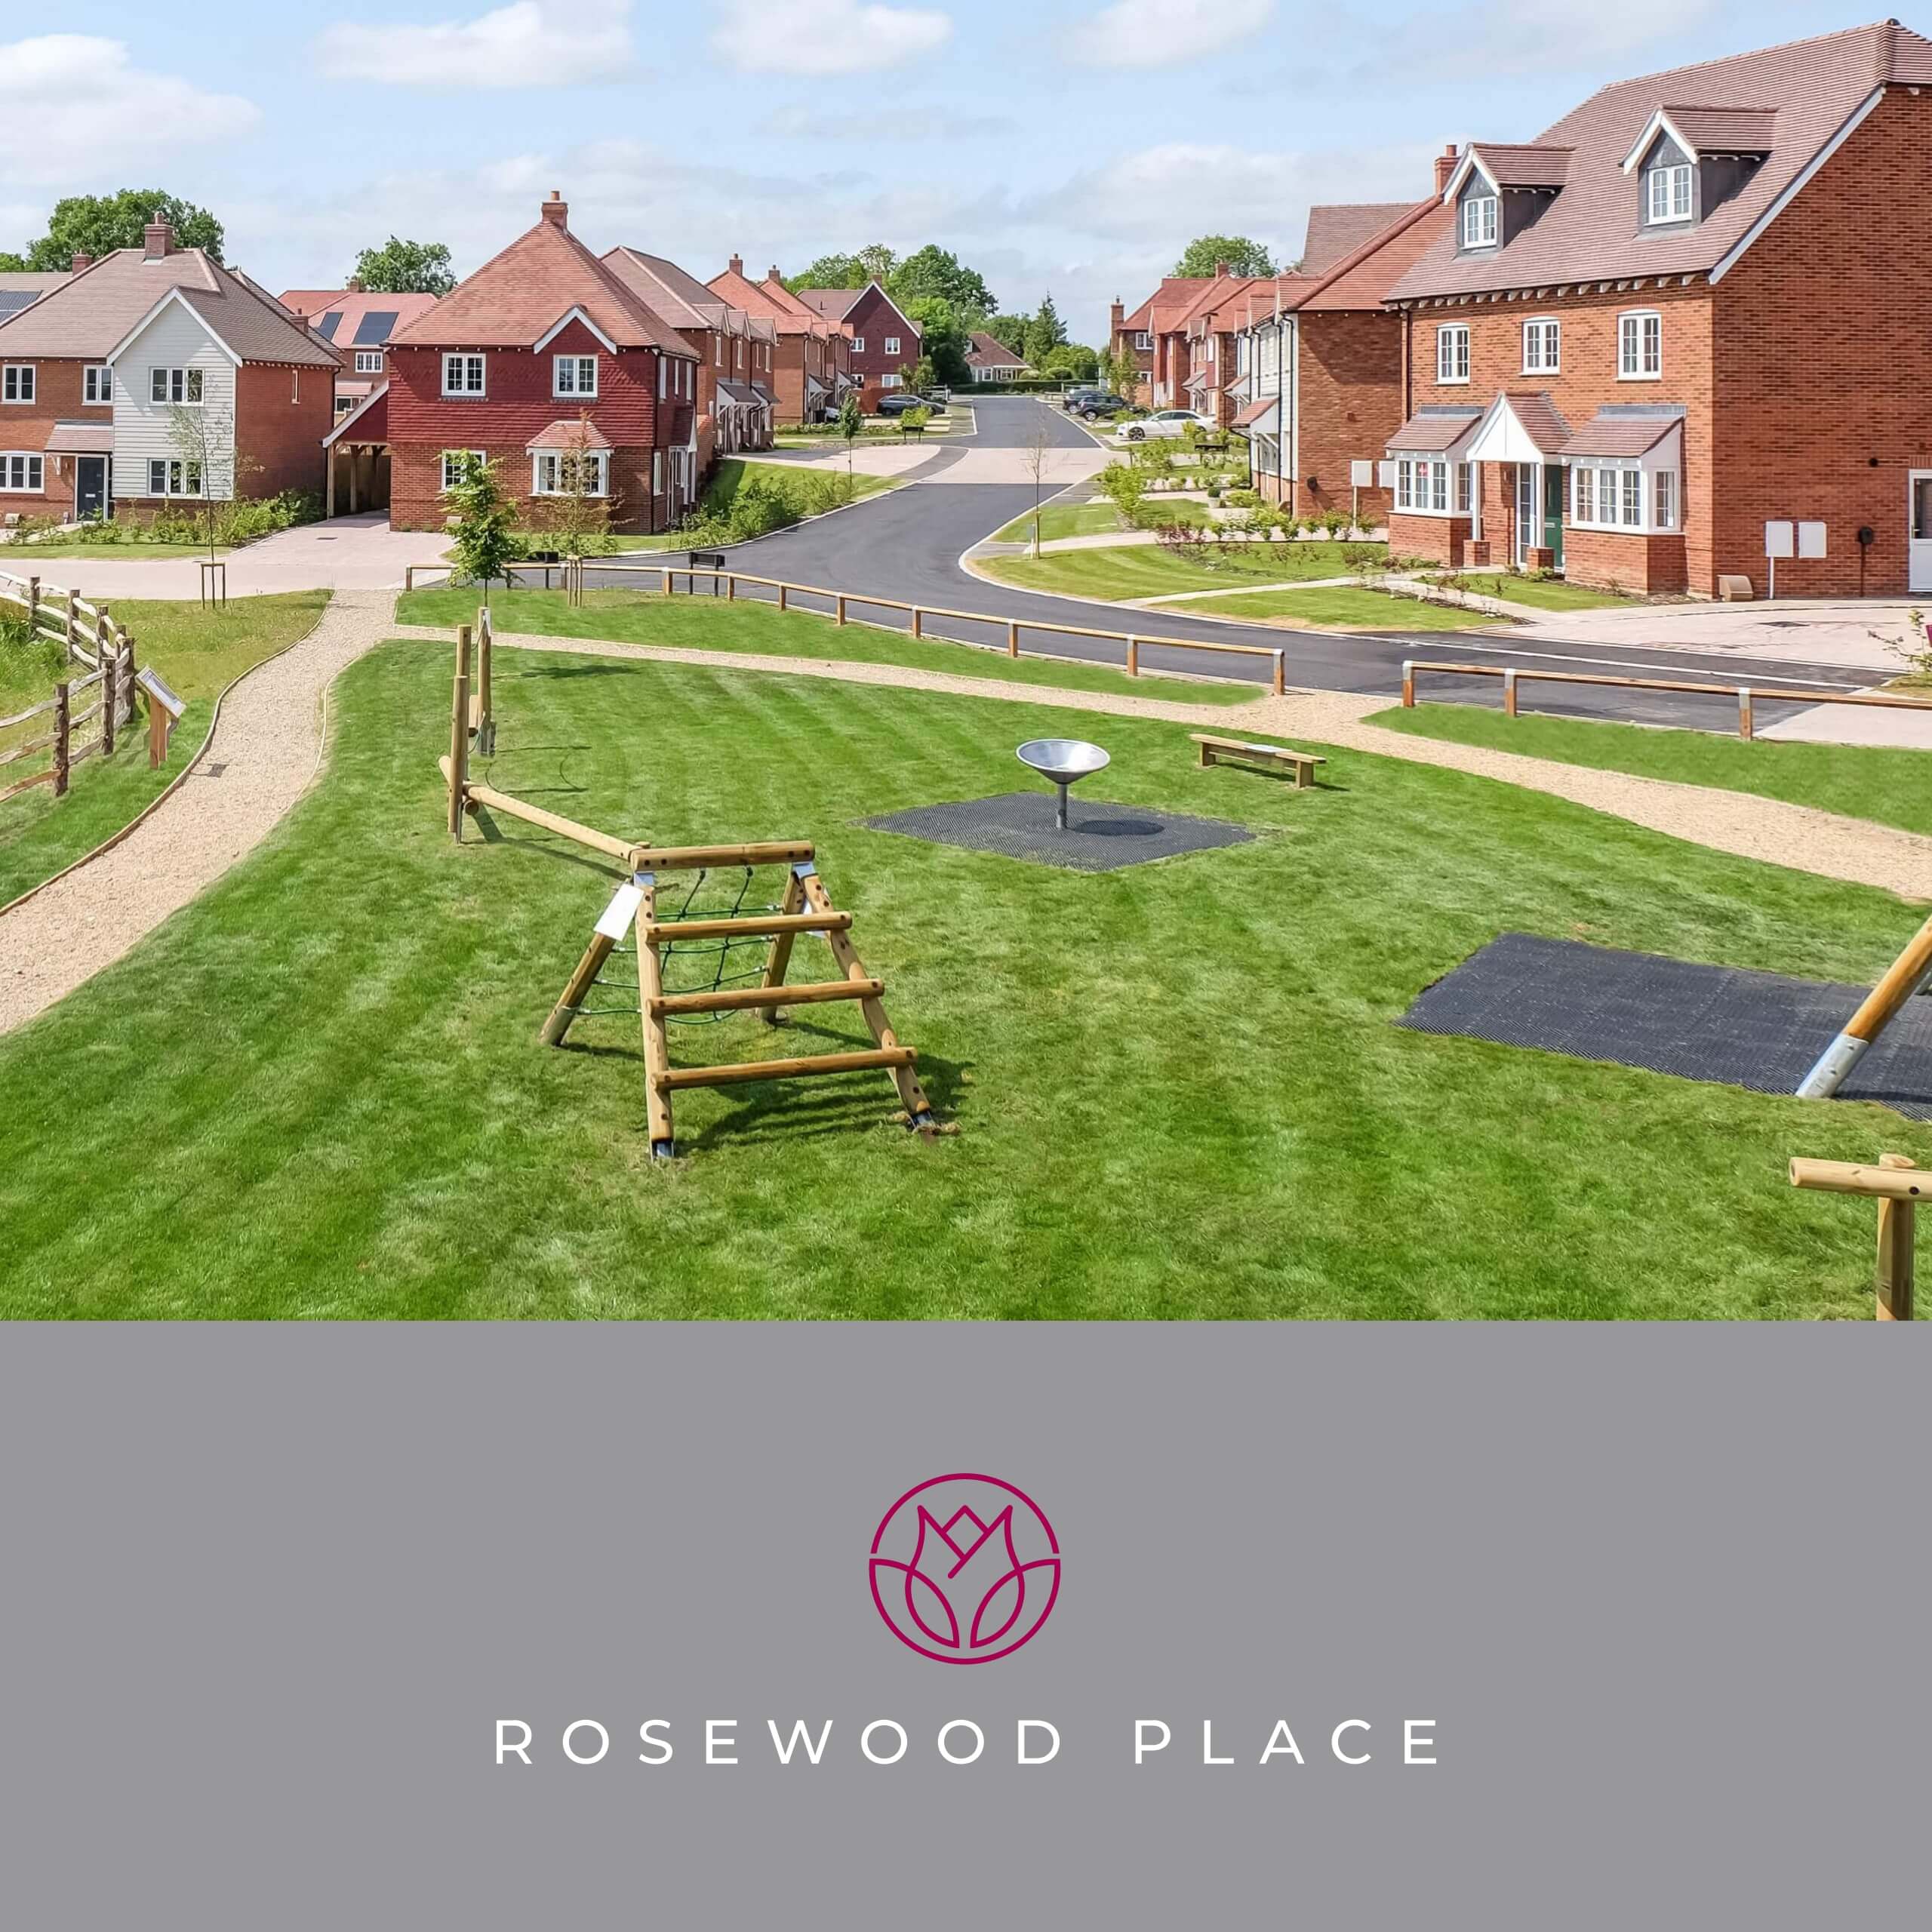 Rosewood-Place-featured-image-square